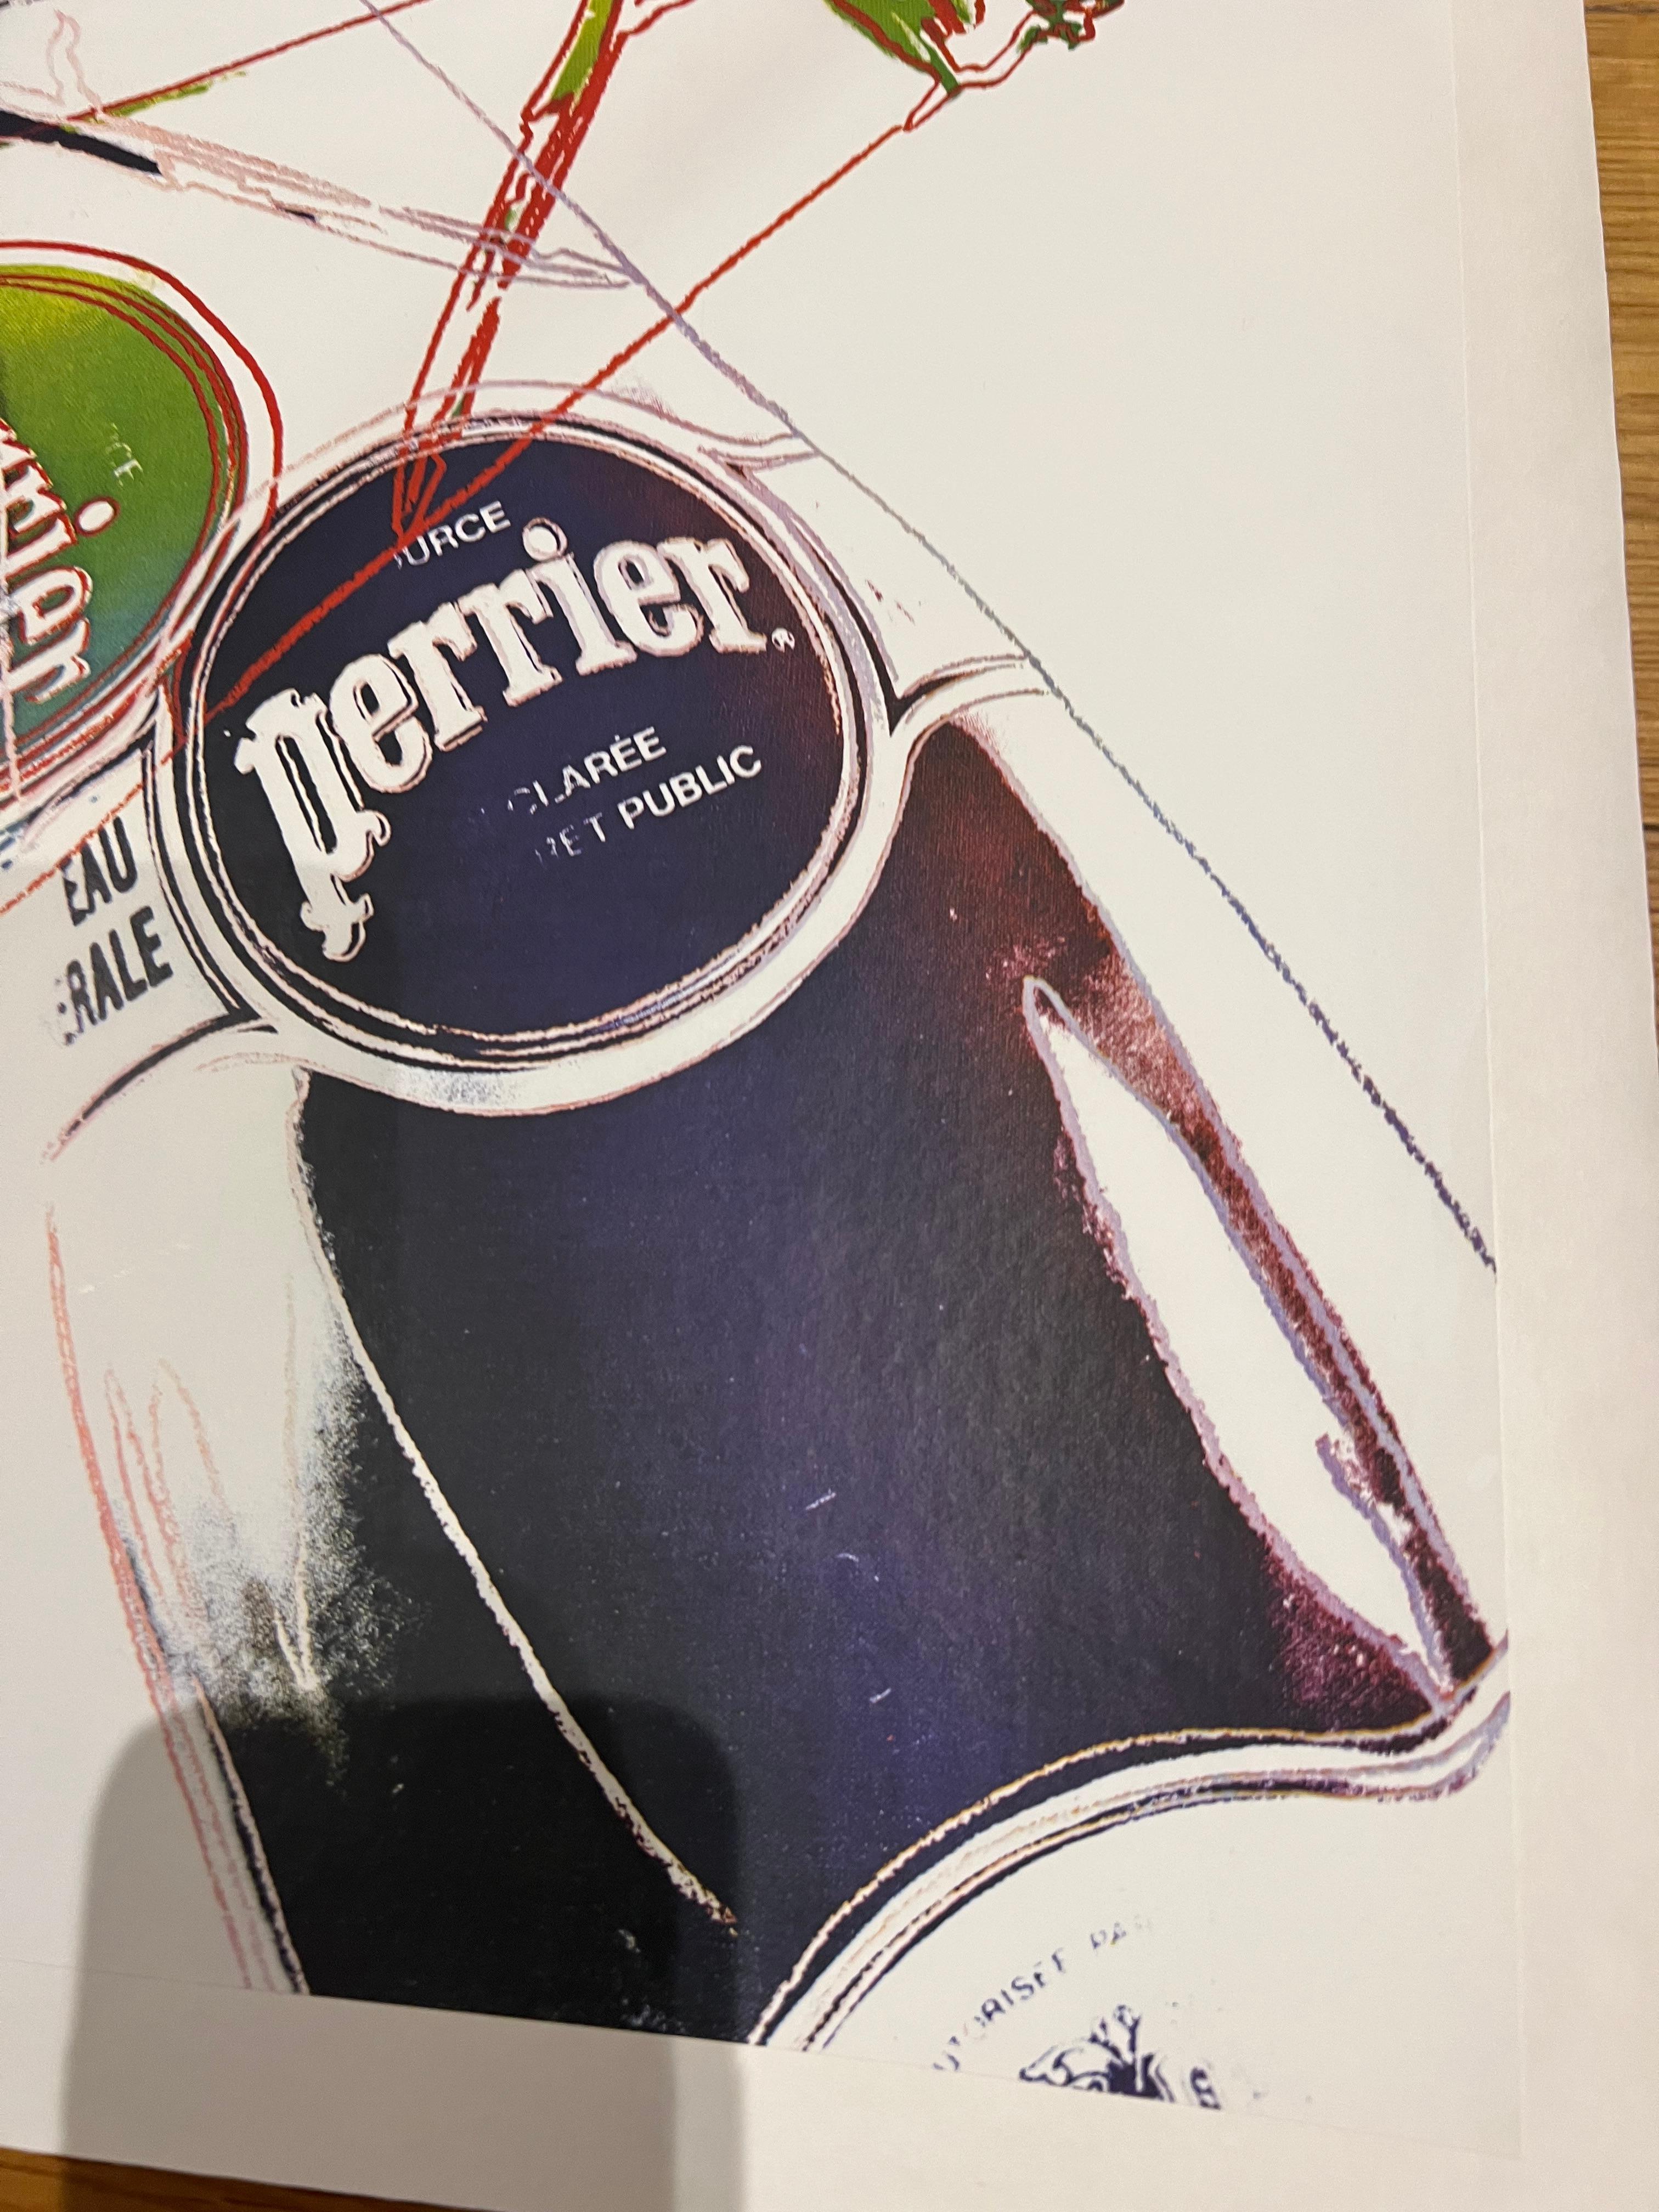 Andy Warhol, Perrier - white 4